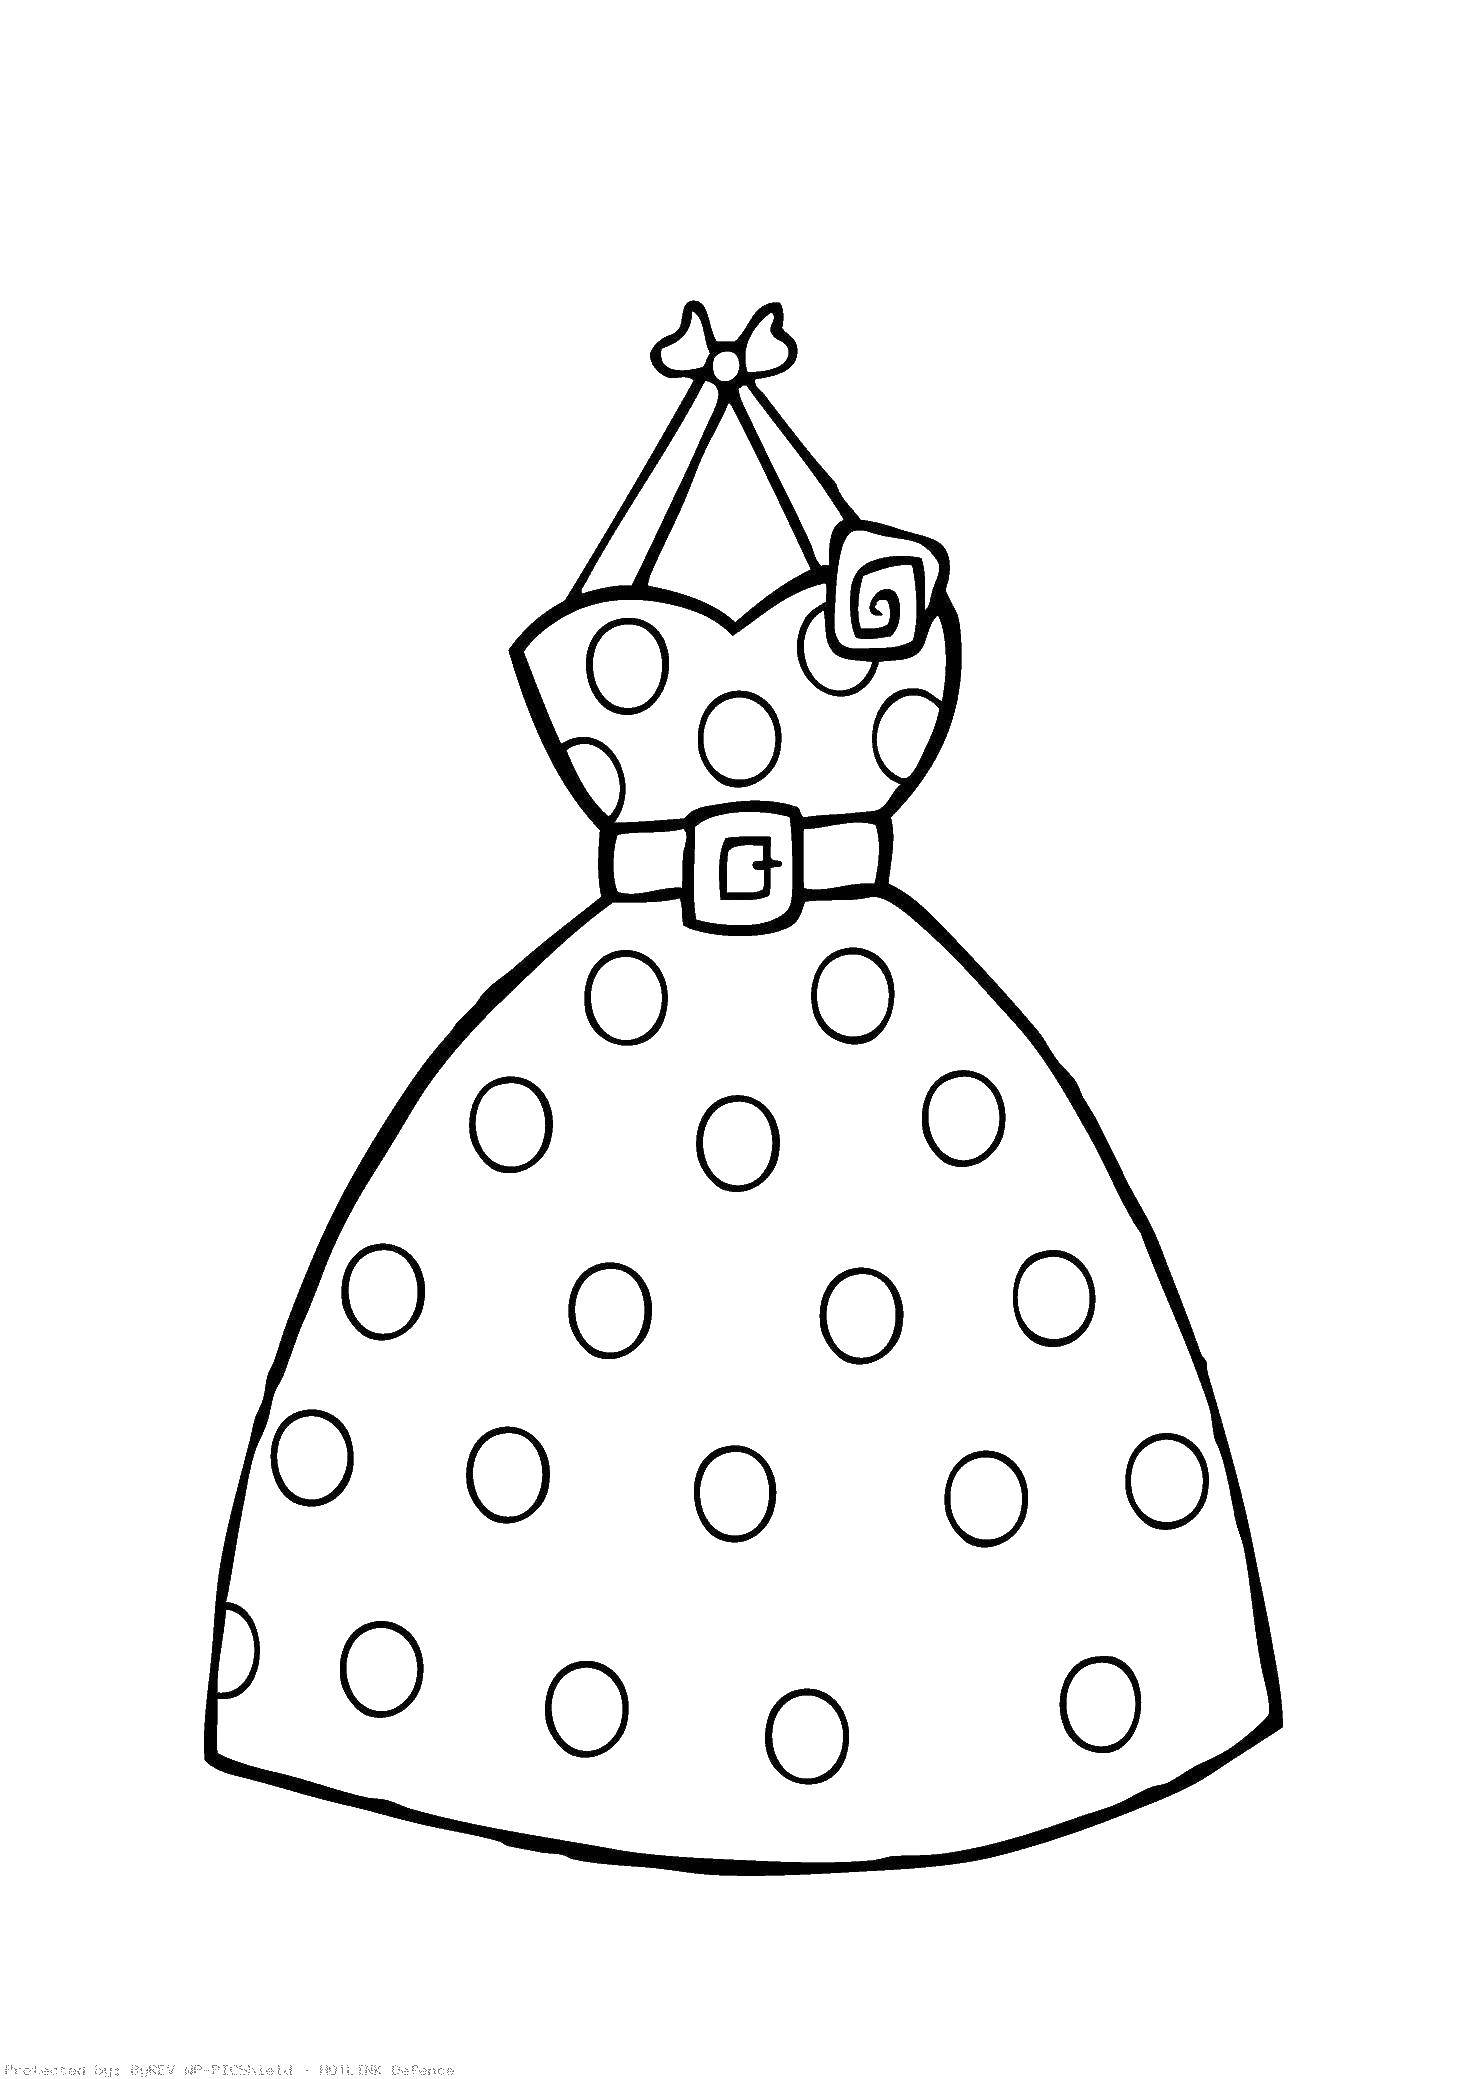 Coloring Dress speckled. Category Dress. Tags:  Clothing, dress.